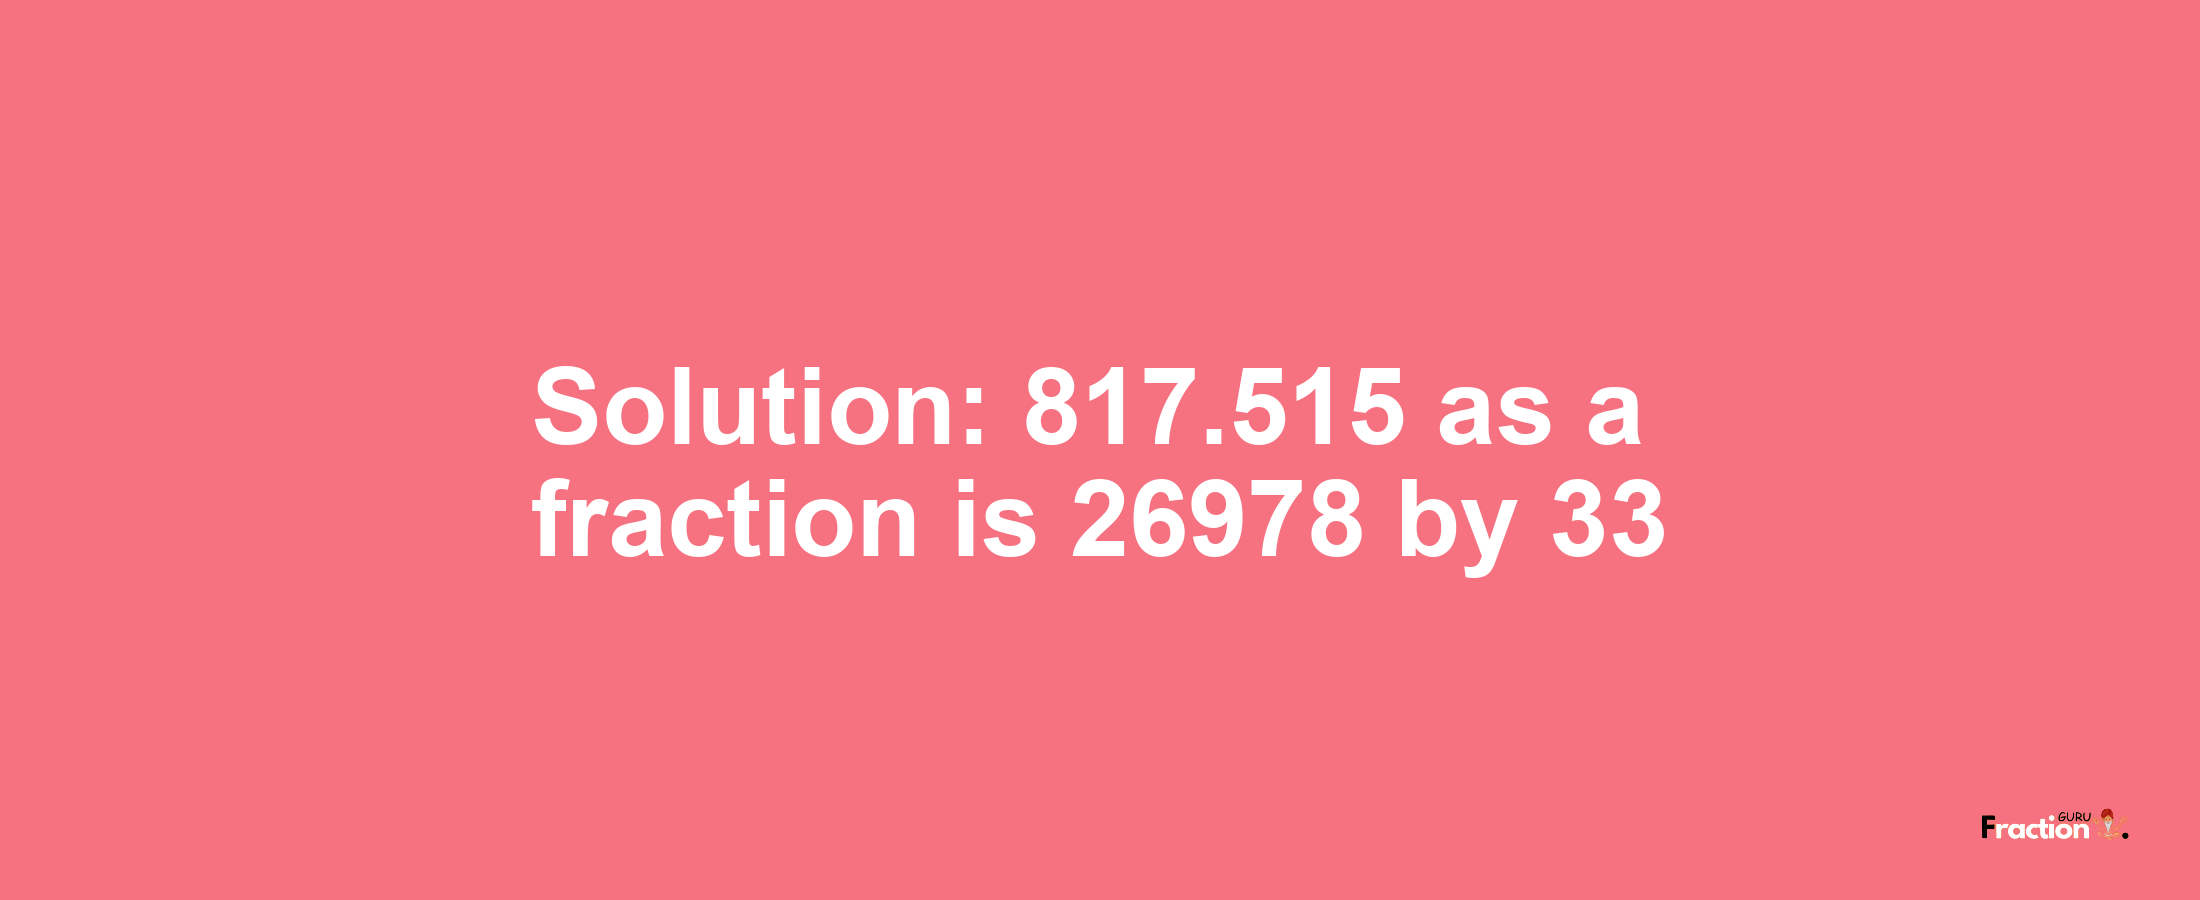 Solution:817.515 as a fraction is 26978/33